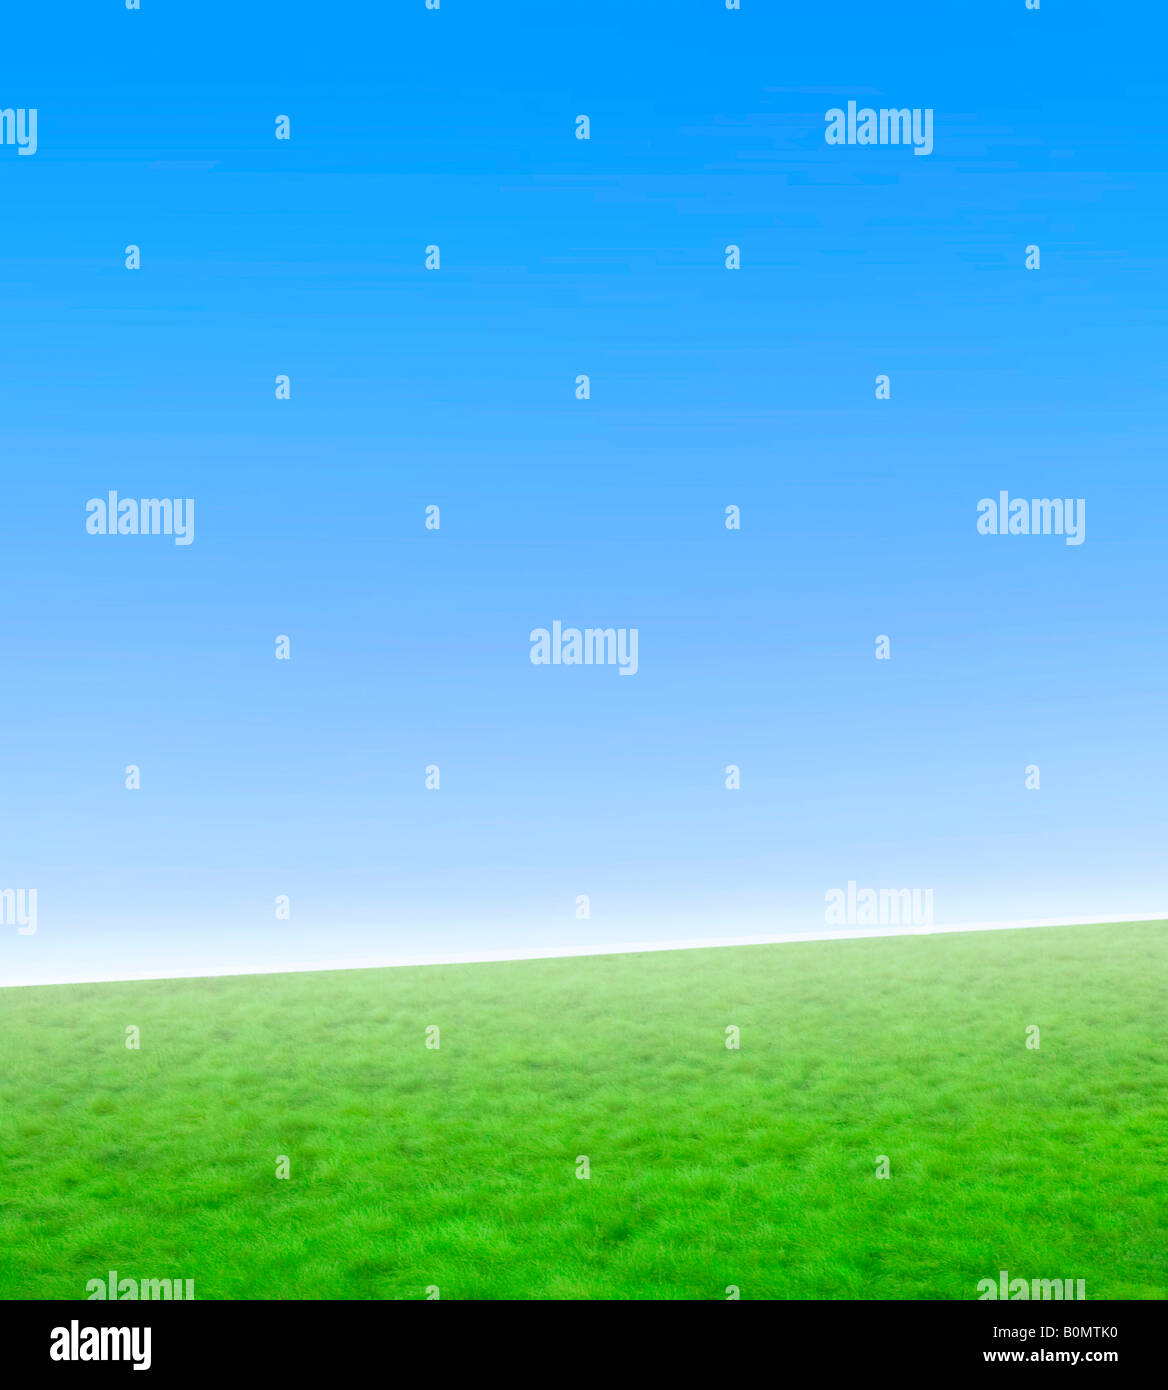 Beautiful simple nature background with green grass and a gradient blue ...